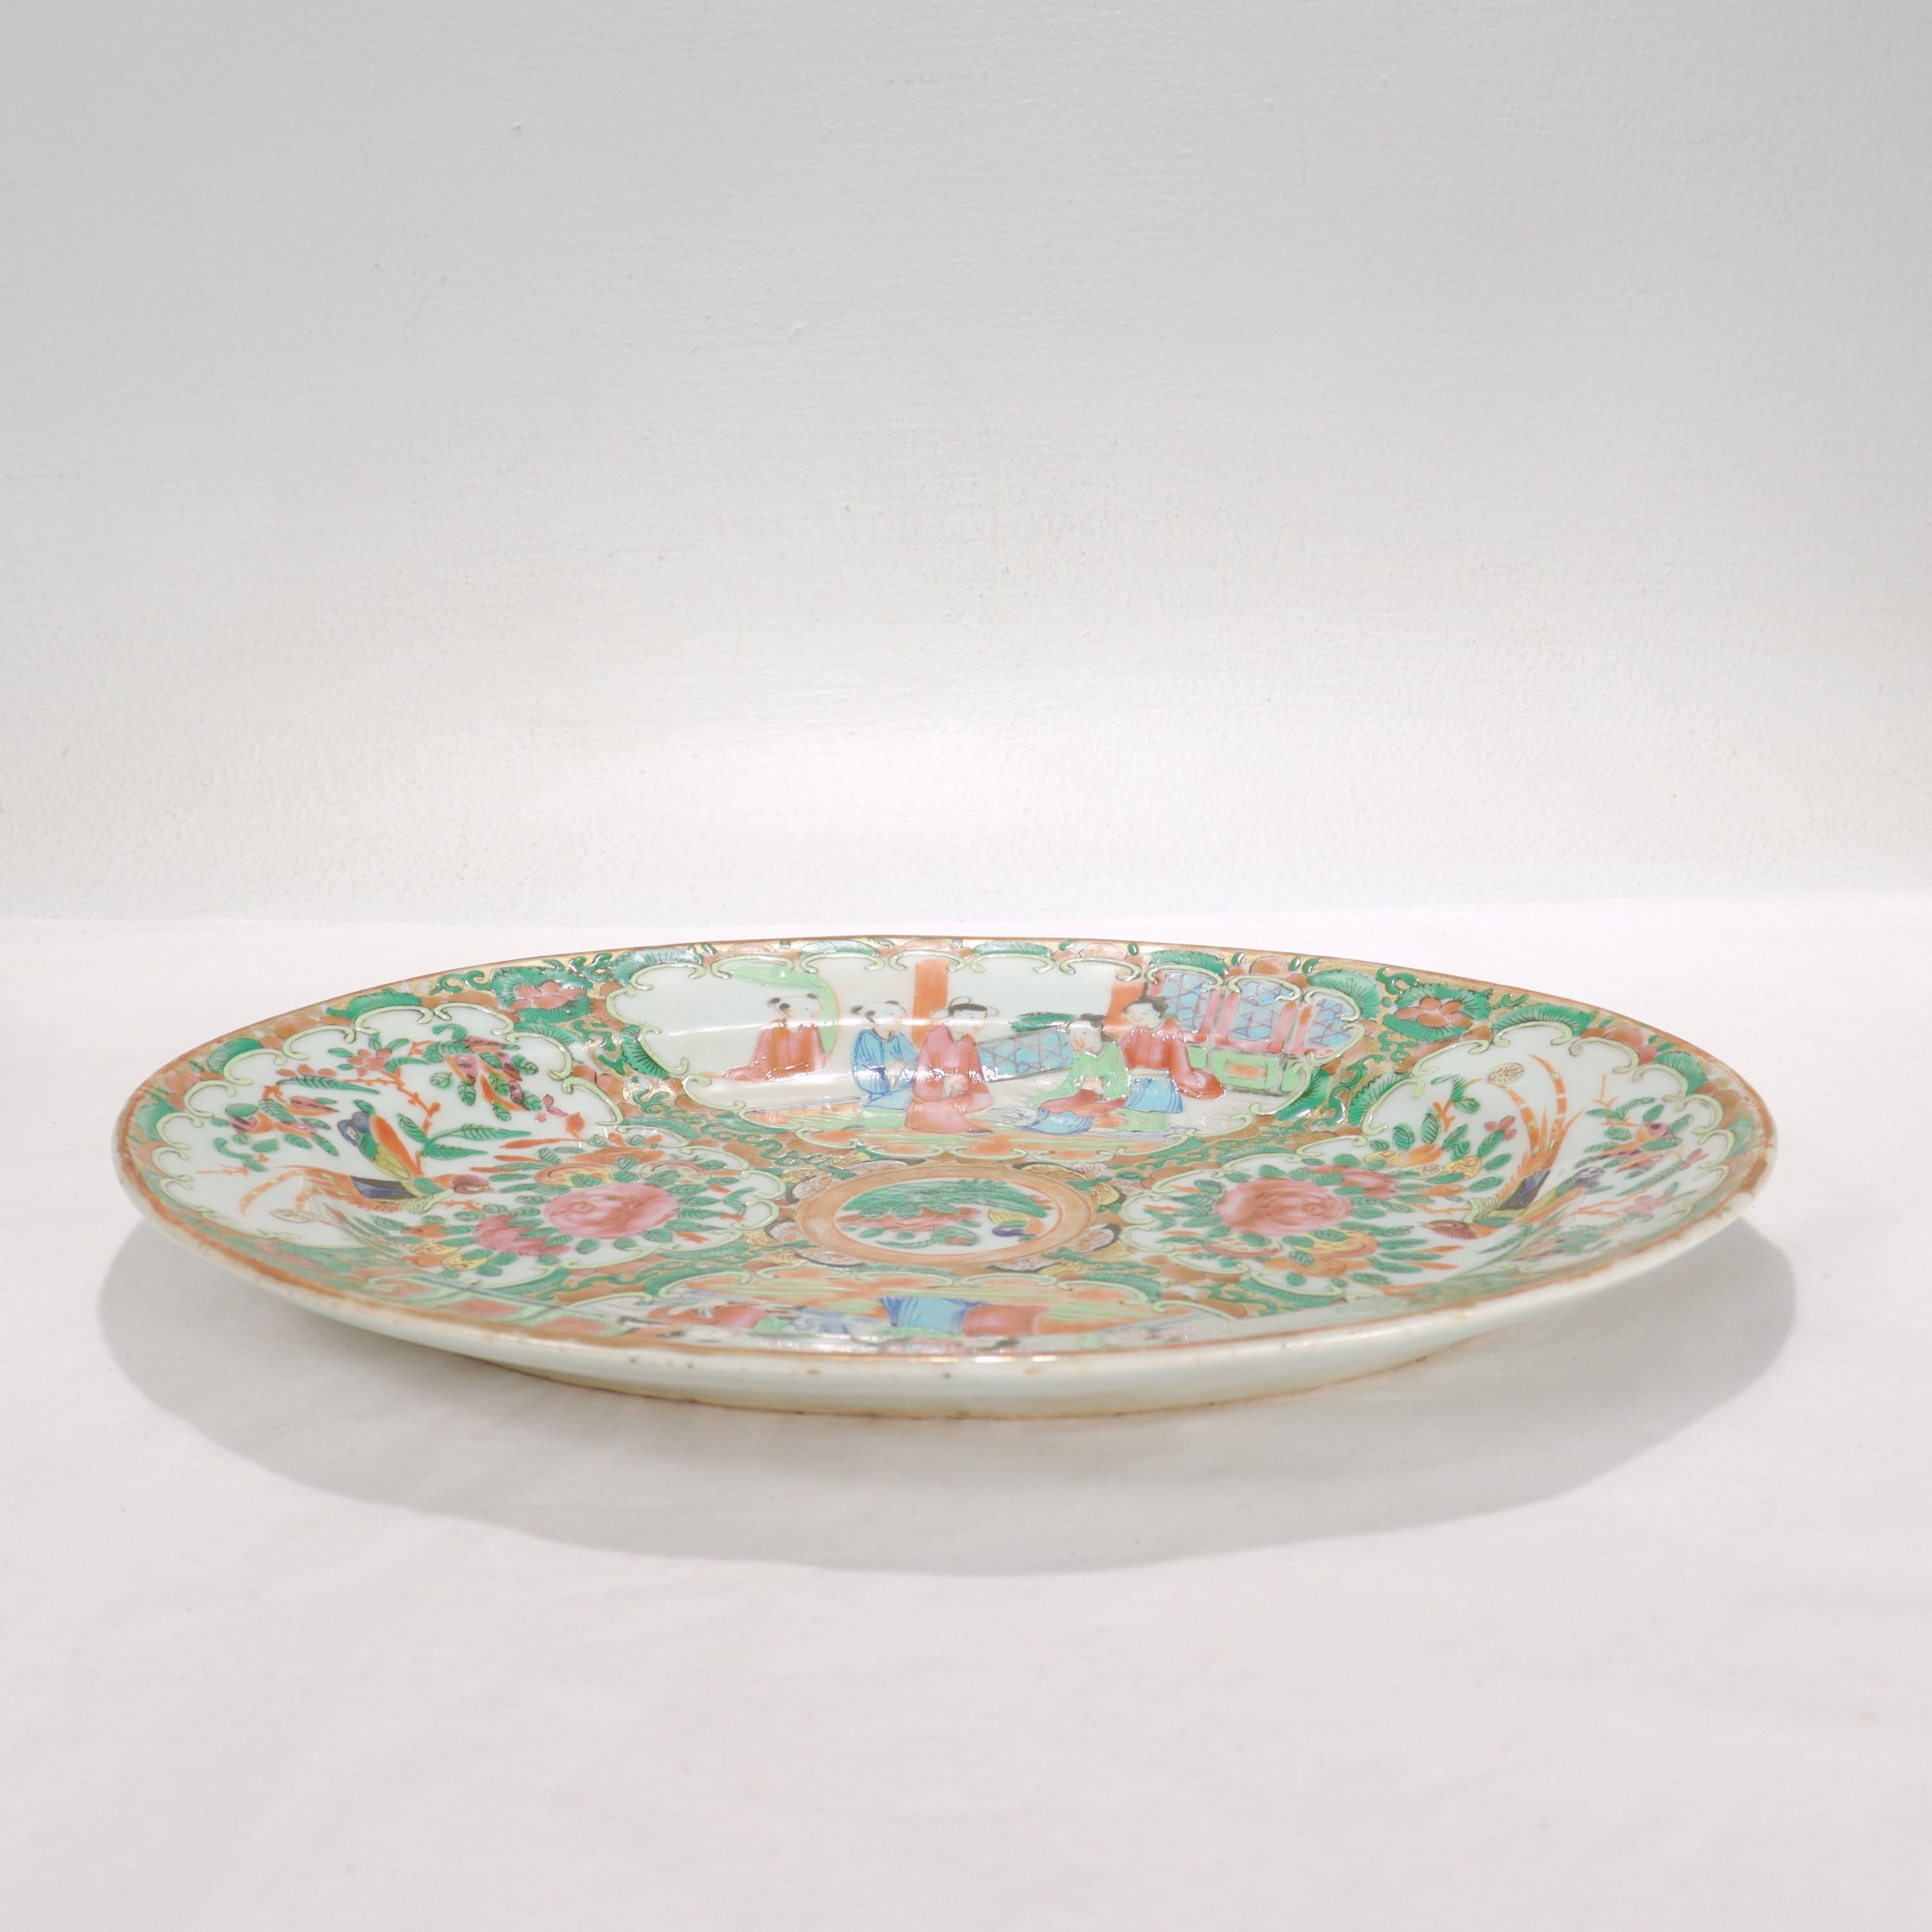 Antique Chinese Export Porcelain Rose Medallion Tray In Good Condition For Sale In Philadelphia, PA